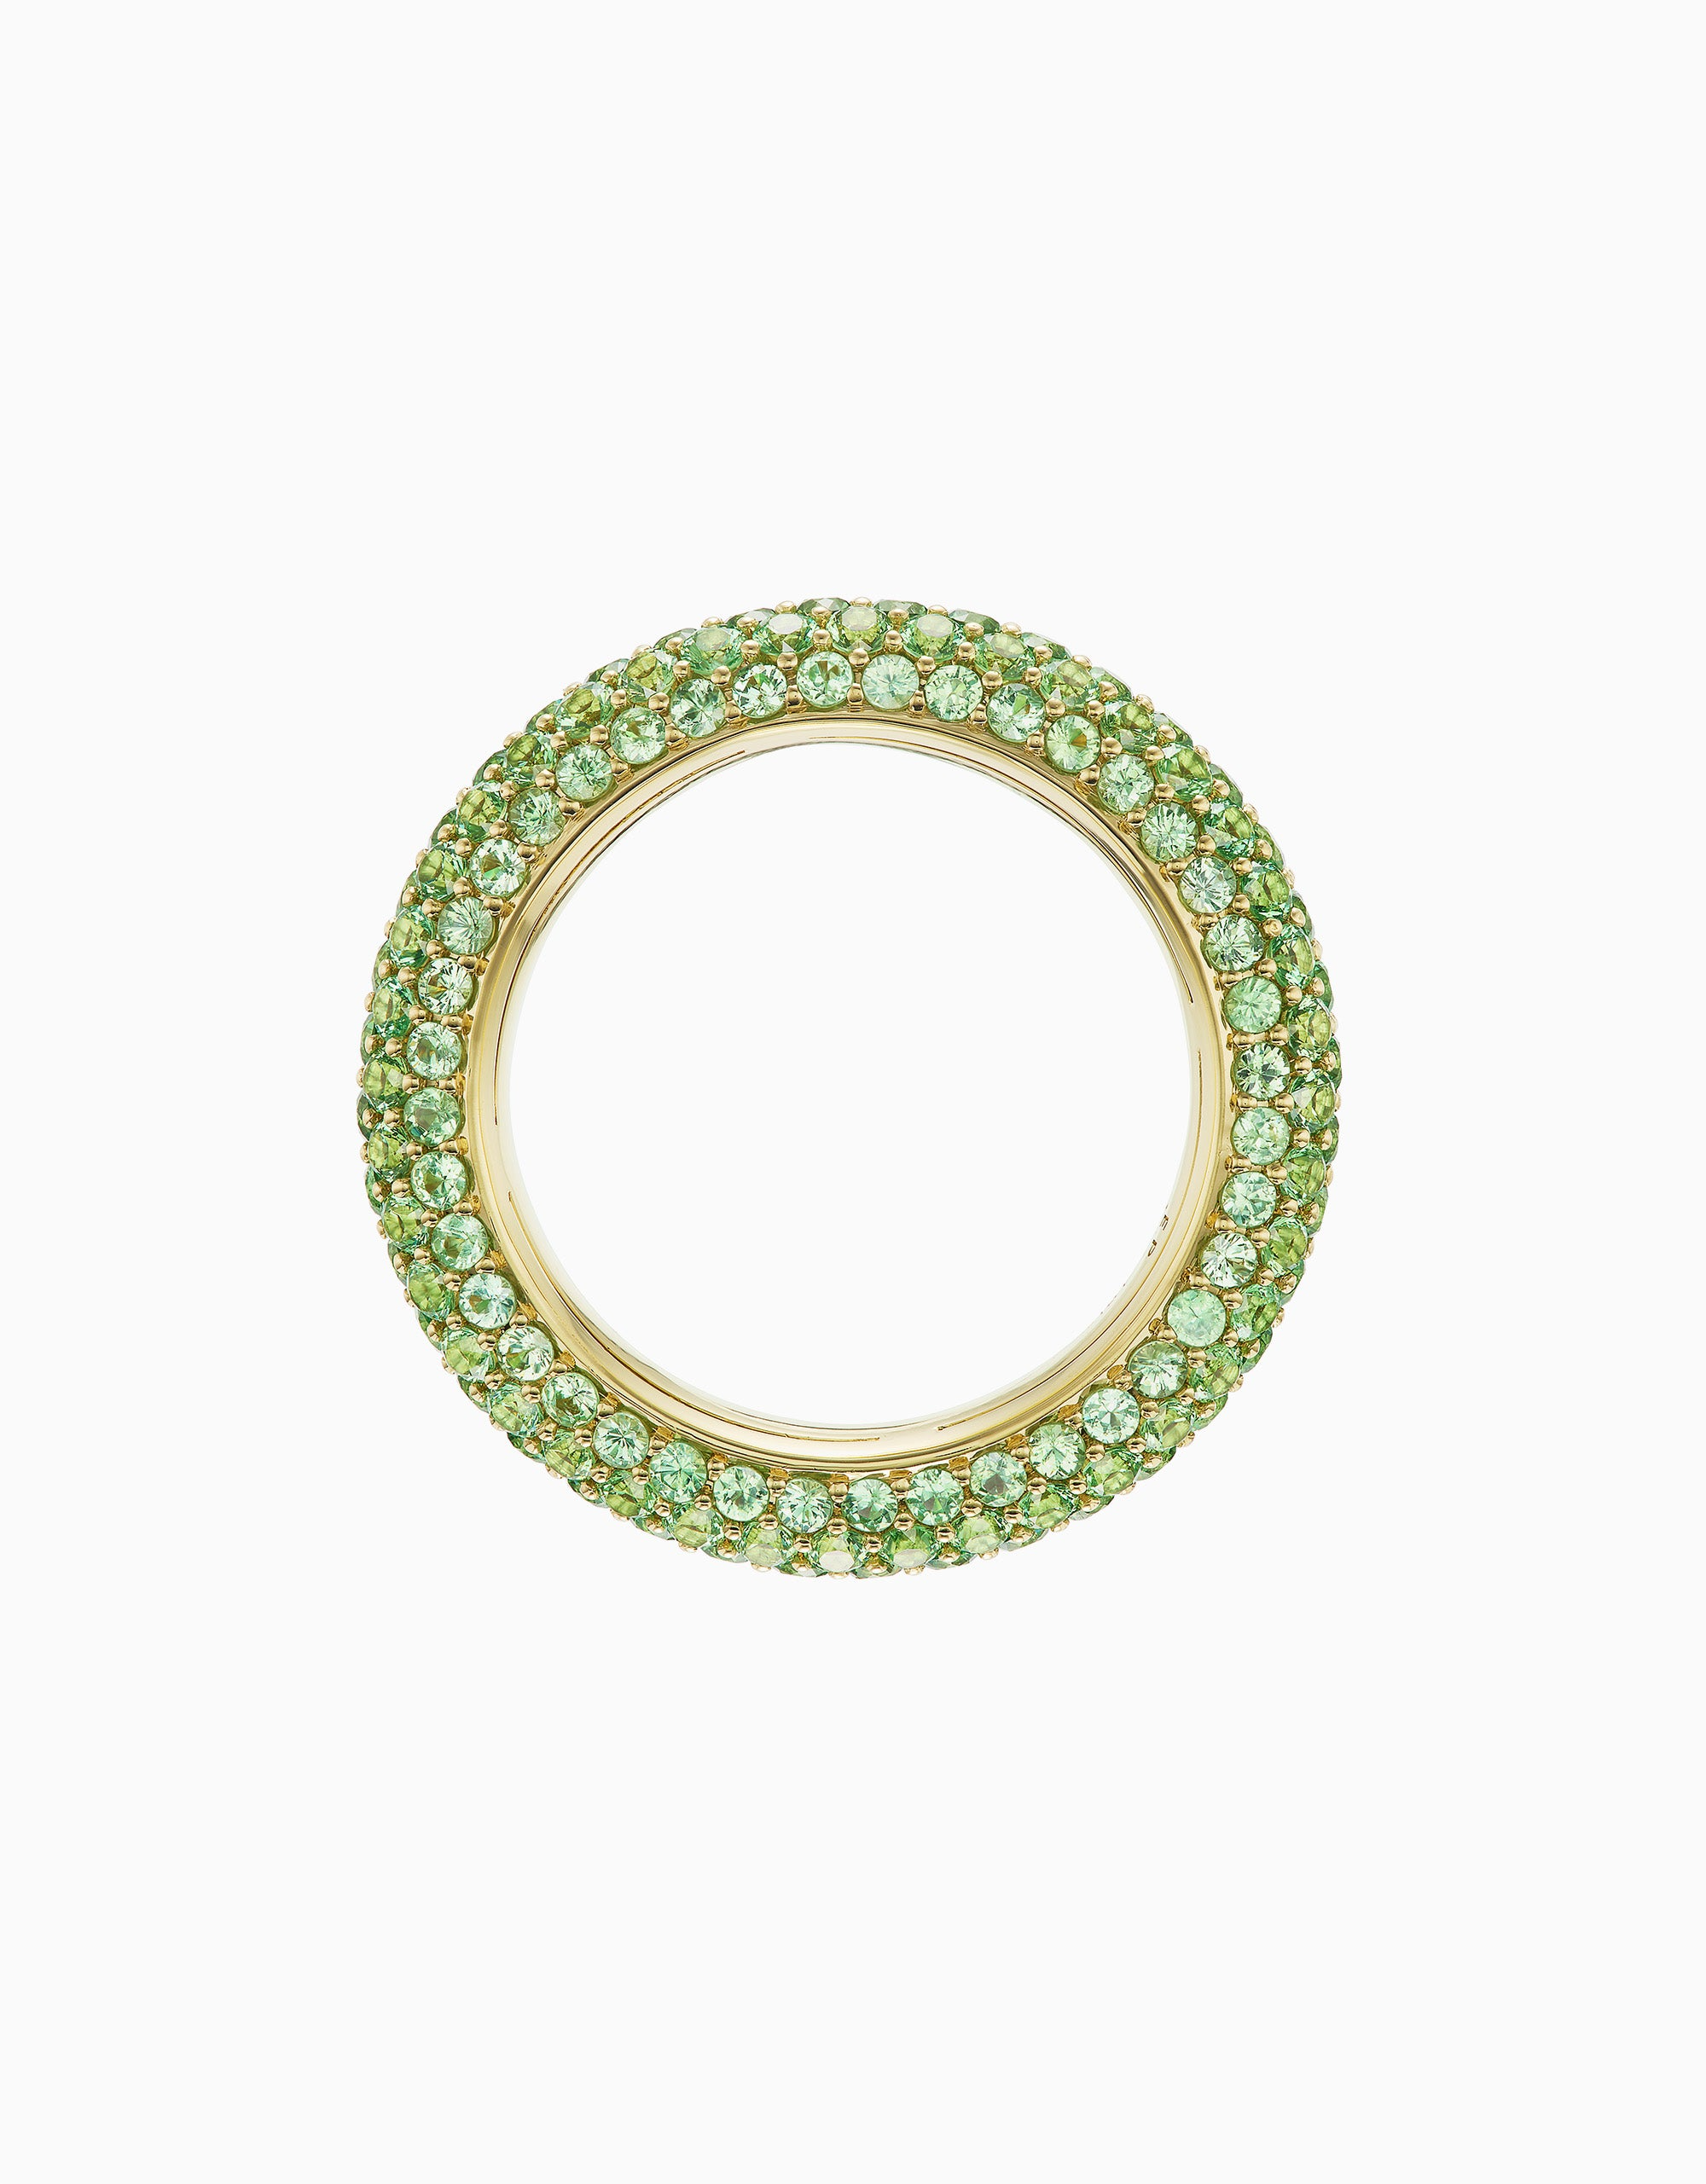 EARTH PUFFY BAND RING - GREEN SAPPHIRES